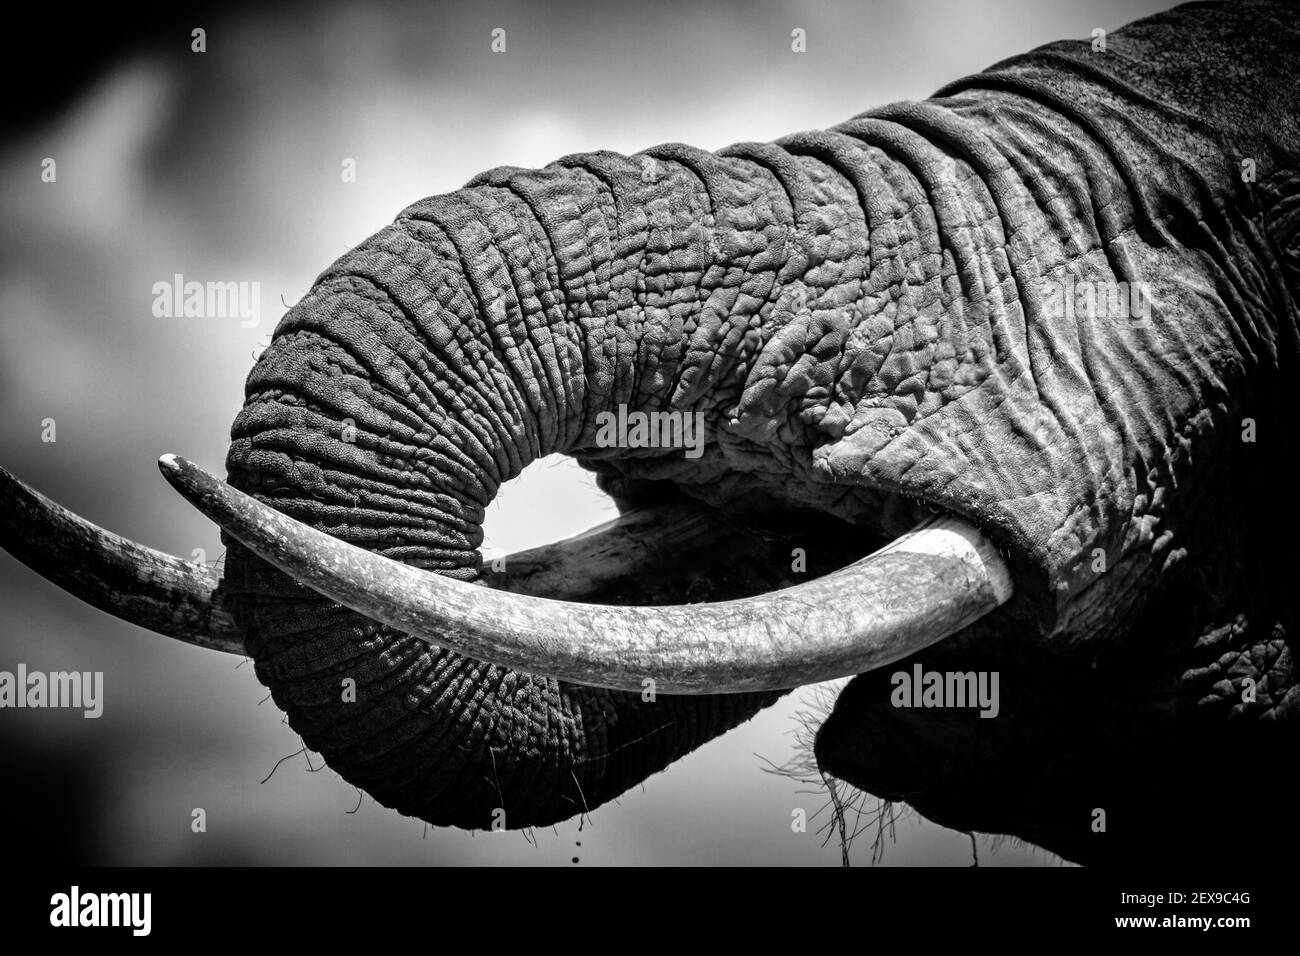 Close-up Elephant trunk and ivory tusks in black and white monochrome showing skin folds and texture. Trunk in mouth drinking water. Amboseli, Kenya Stock Photo